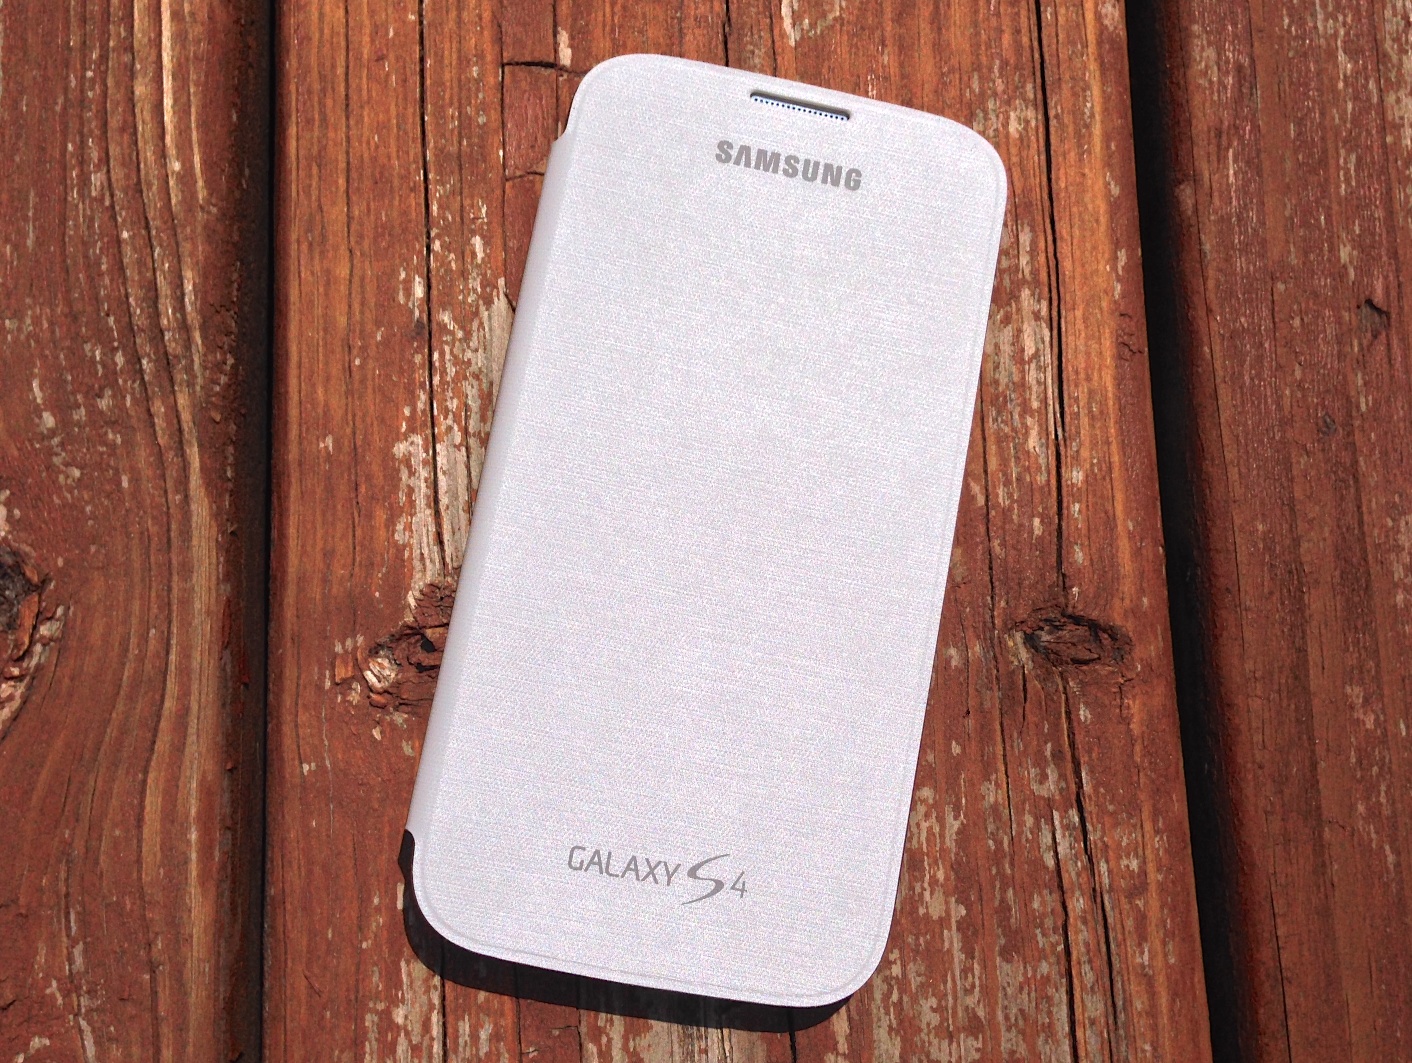 The Samsung Galaxy S4 Flip Cover is a slim, protective Galaxy S4 case.